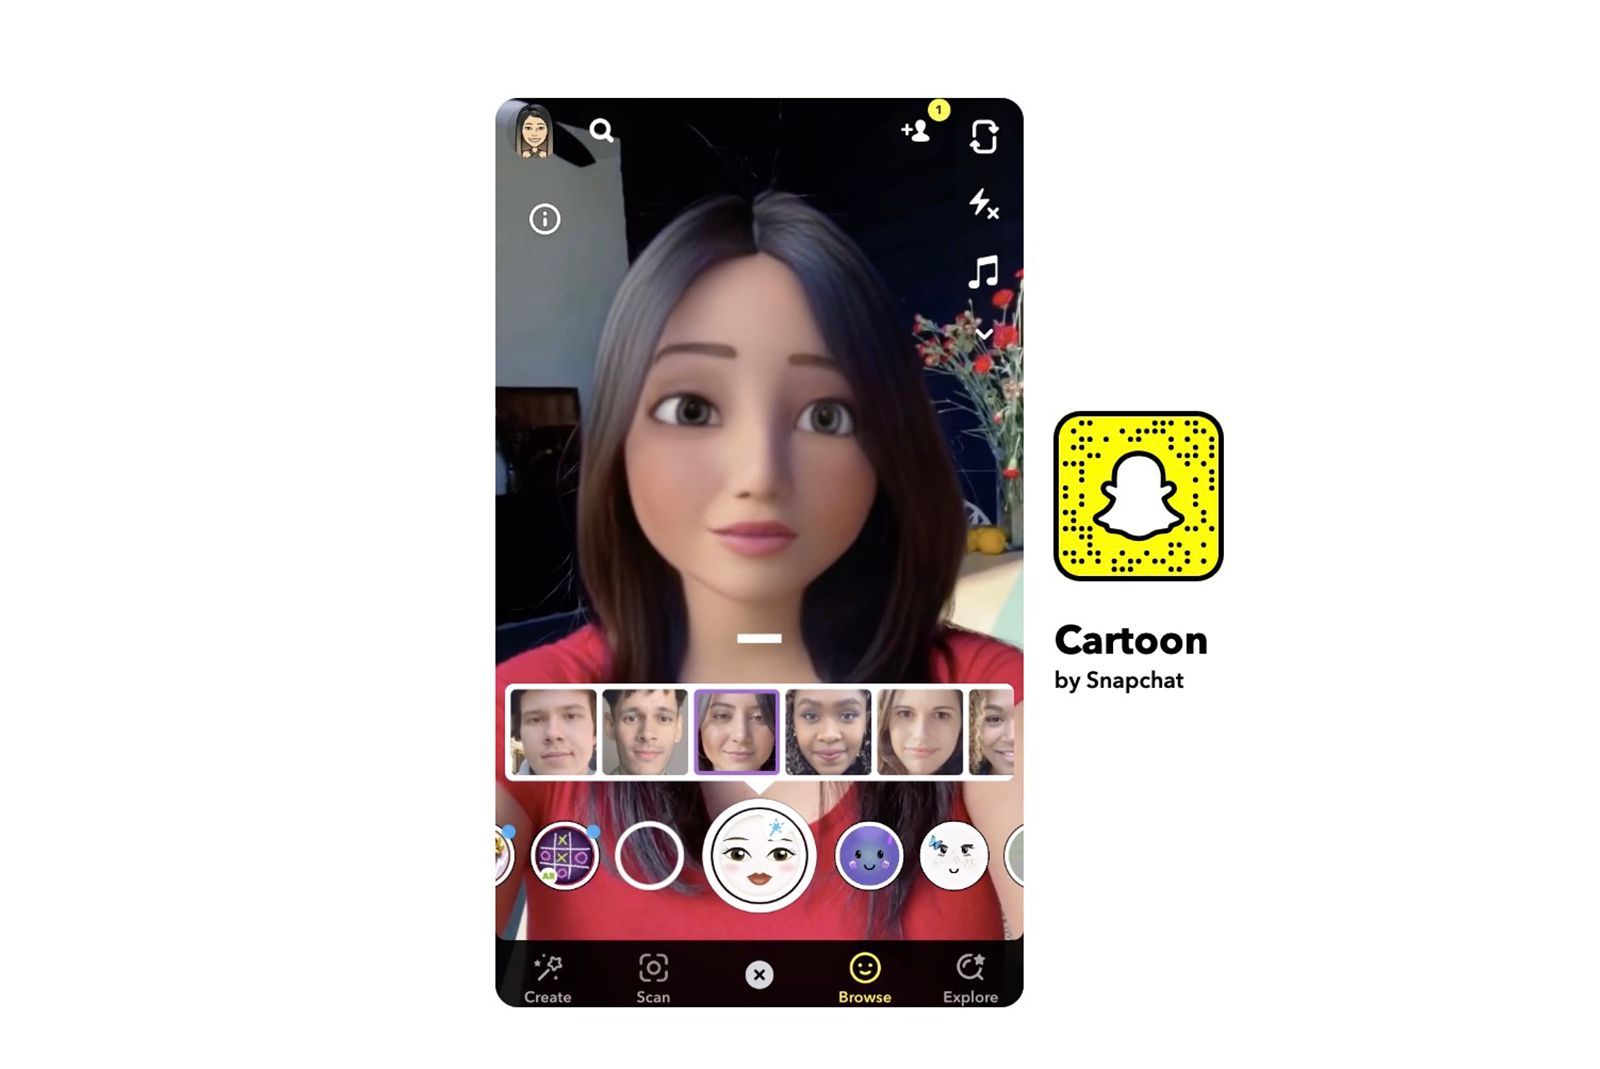 How to use Snapchat's cartoon filters: Turn yourself into a Disney character photo 2